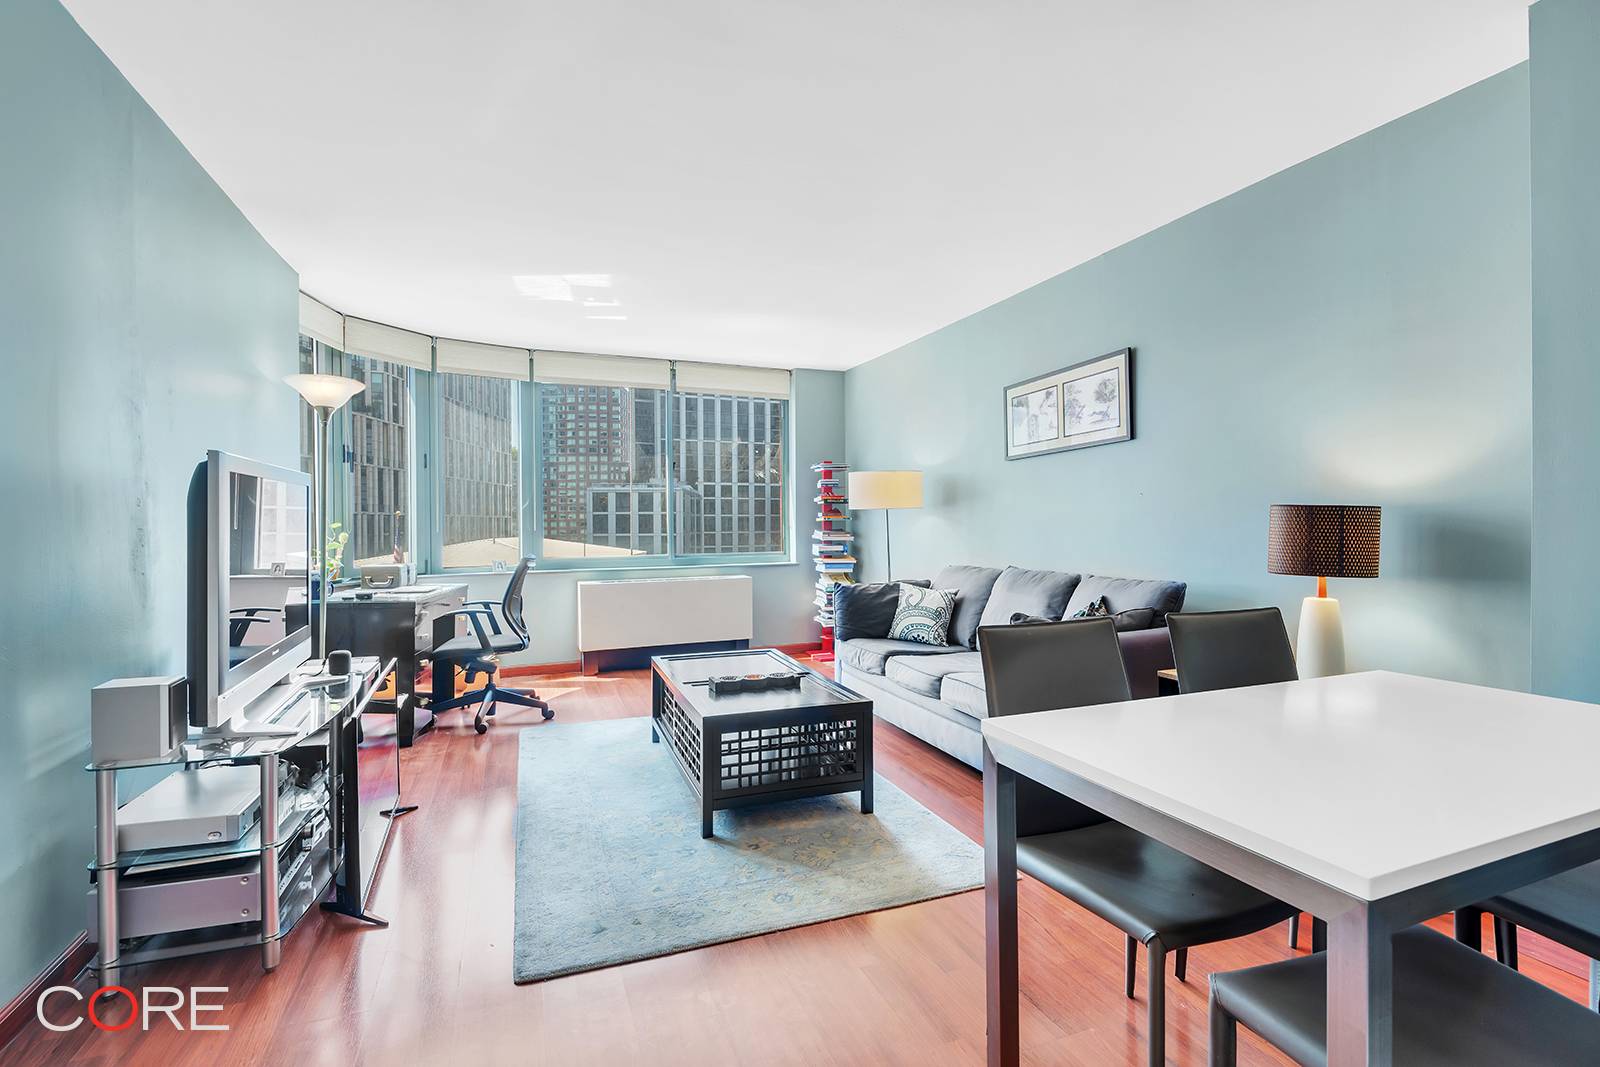 This one bedroom, one bathroom west facing apartment boasts sunset and water views, in a well maintained, full service condominium building located in Tribeca.